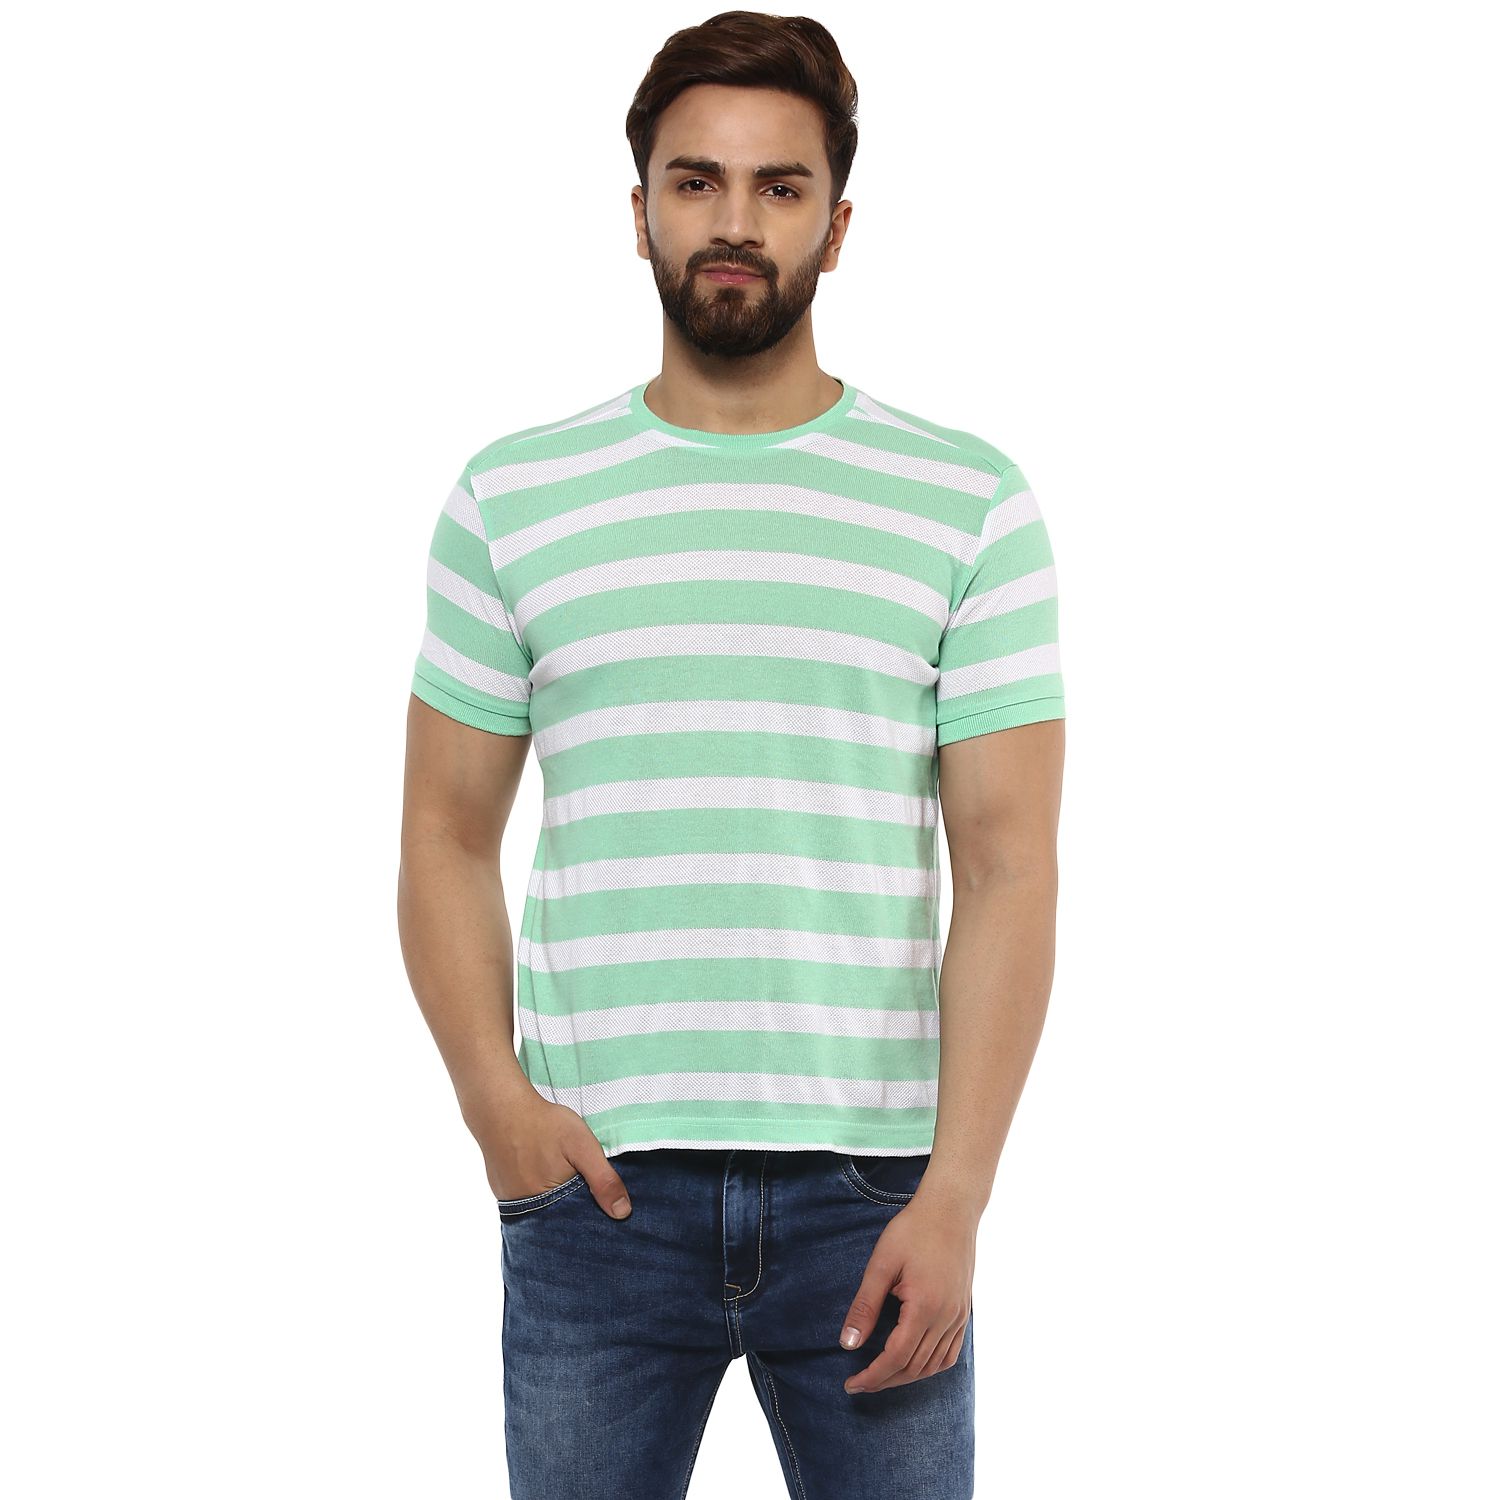 Mufti Green Round T-Shirt - Buy Mufti Green Round T-Shirt Online at Low ...